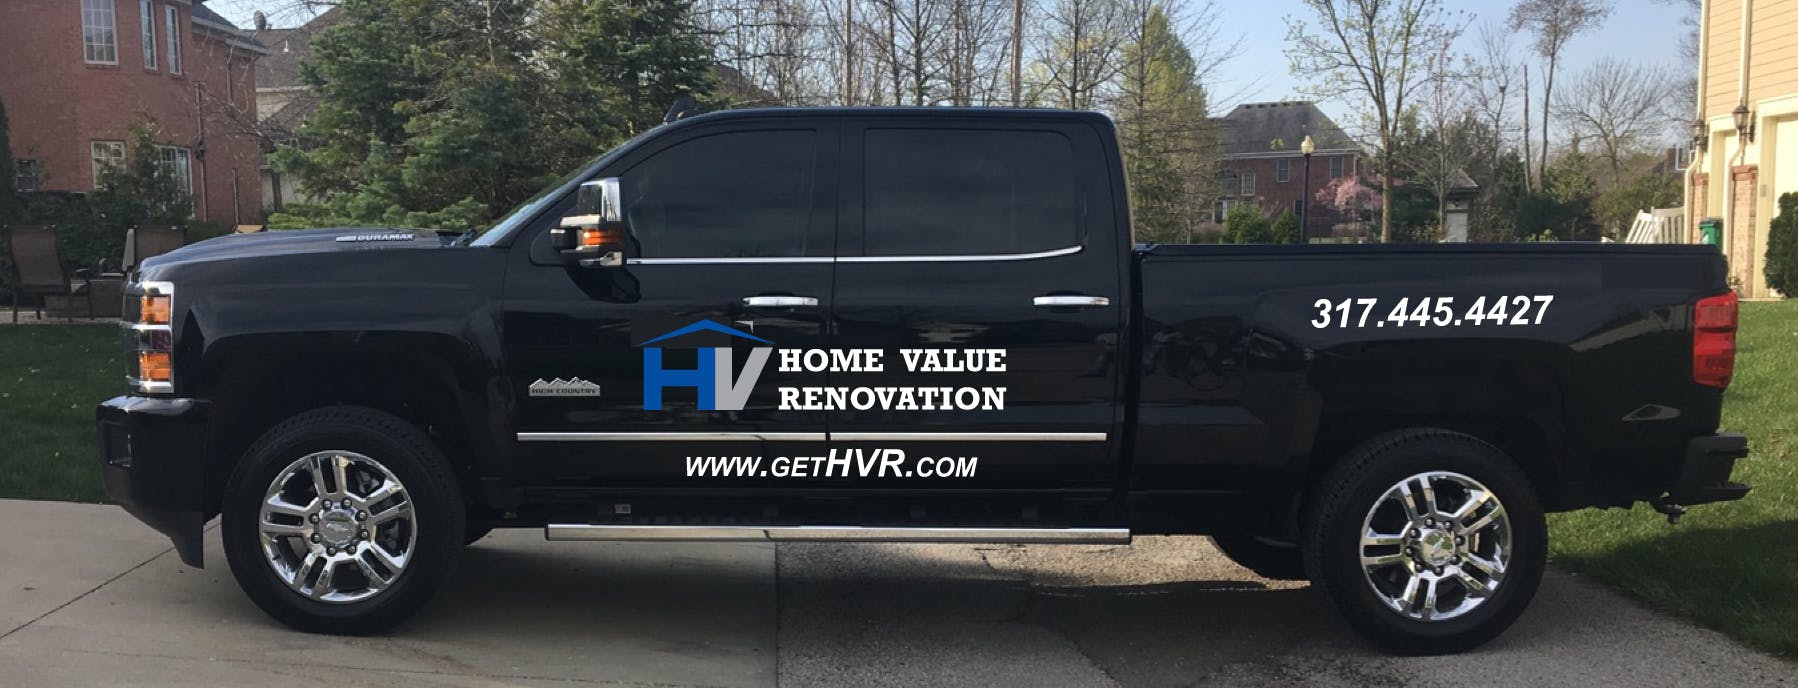 Home Value Renovation Experts